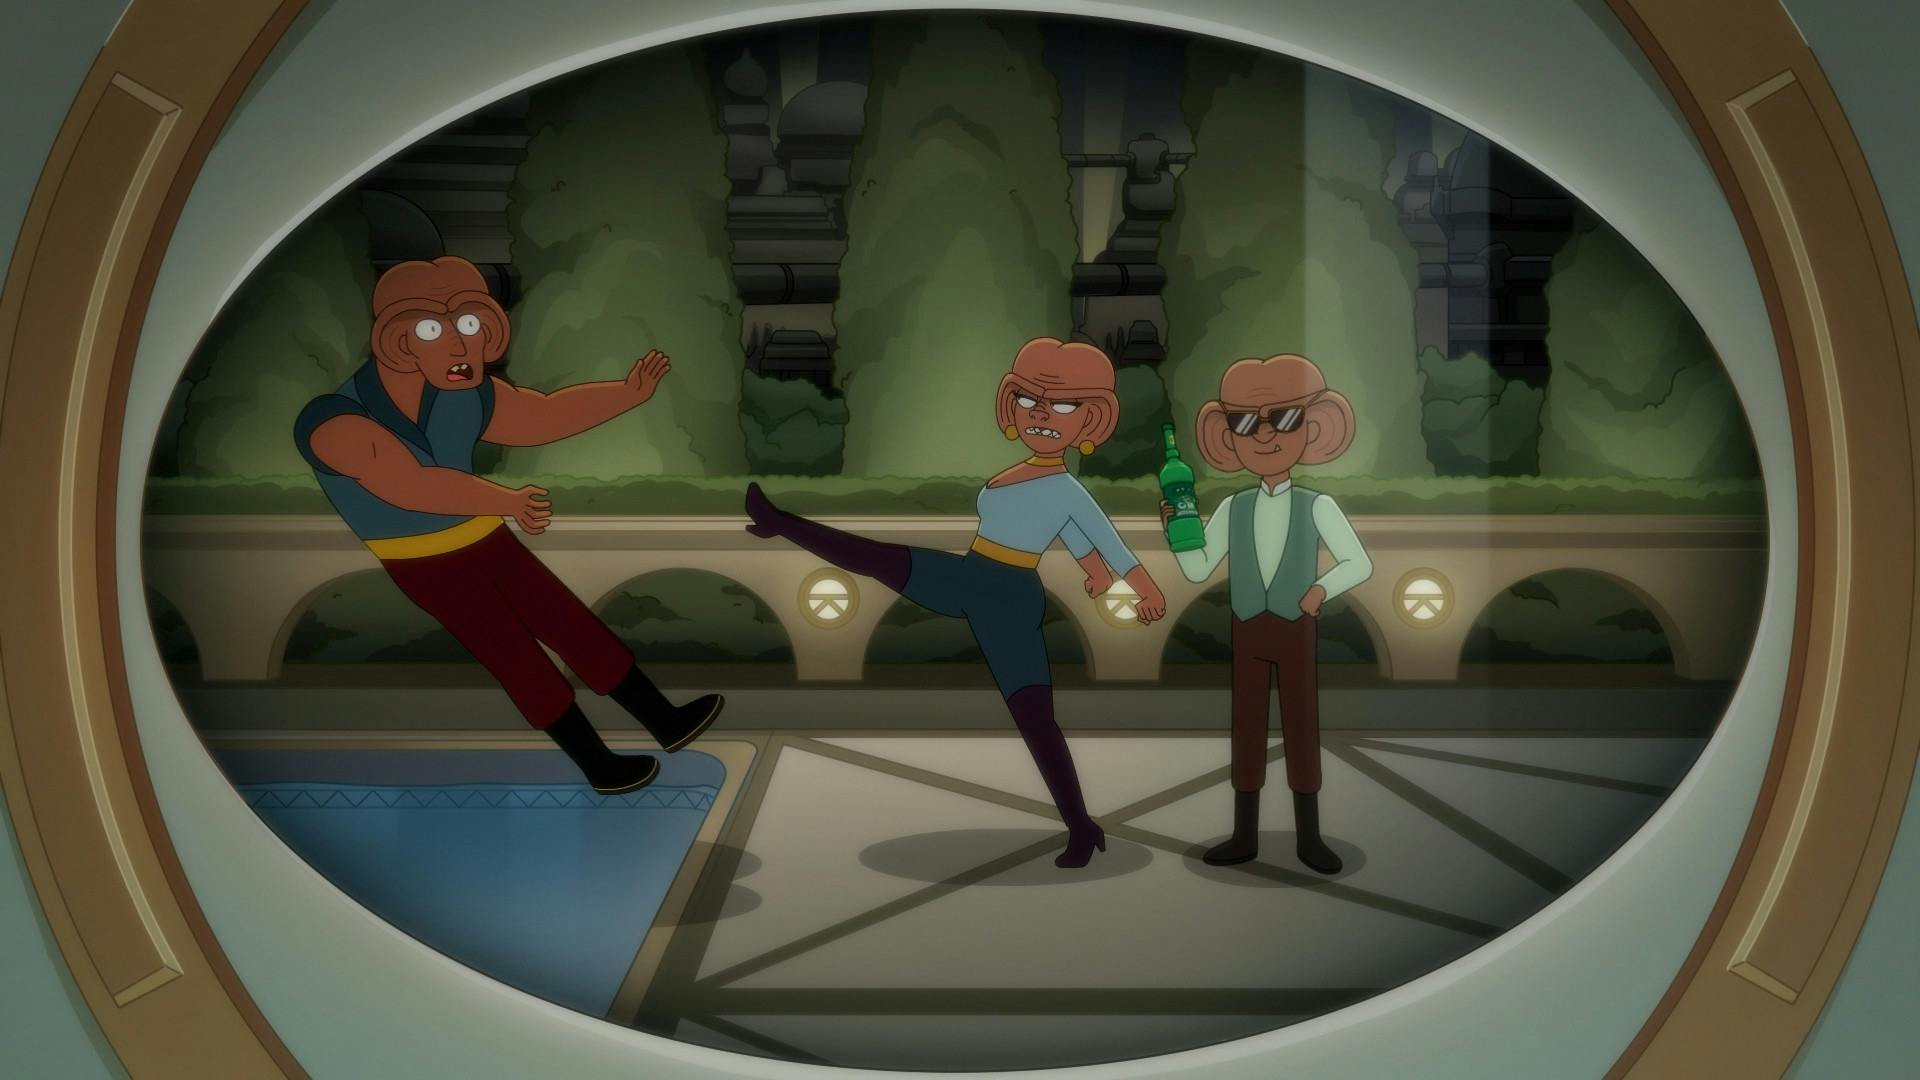 A Slug-o-Cola commercial where a Ferengi man flexes sporting his sunglasses as a Ferengi woman kicks her boyfriend into the pool in 'Parth Ferengi's Heart Place'